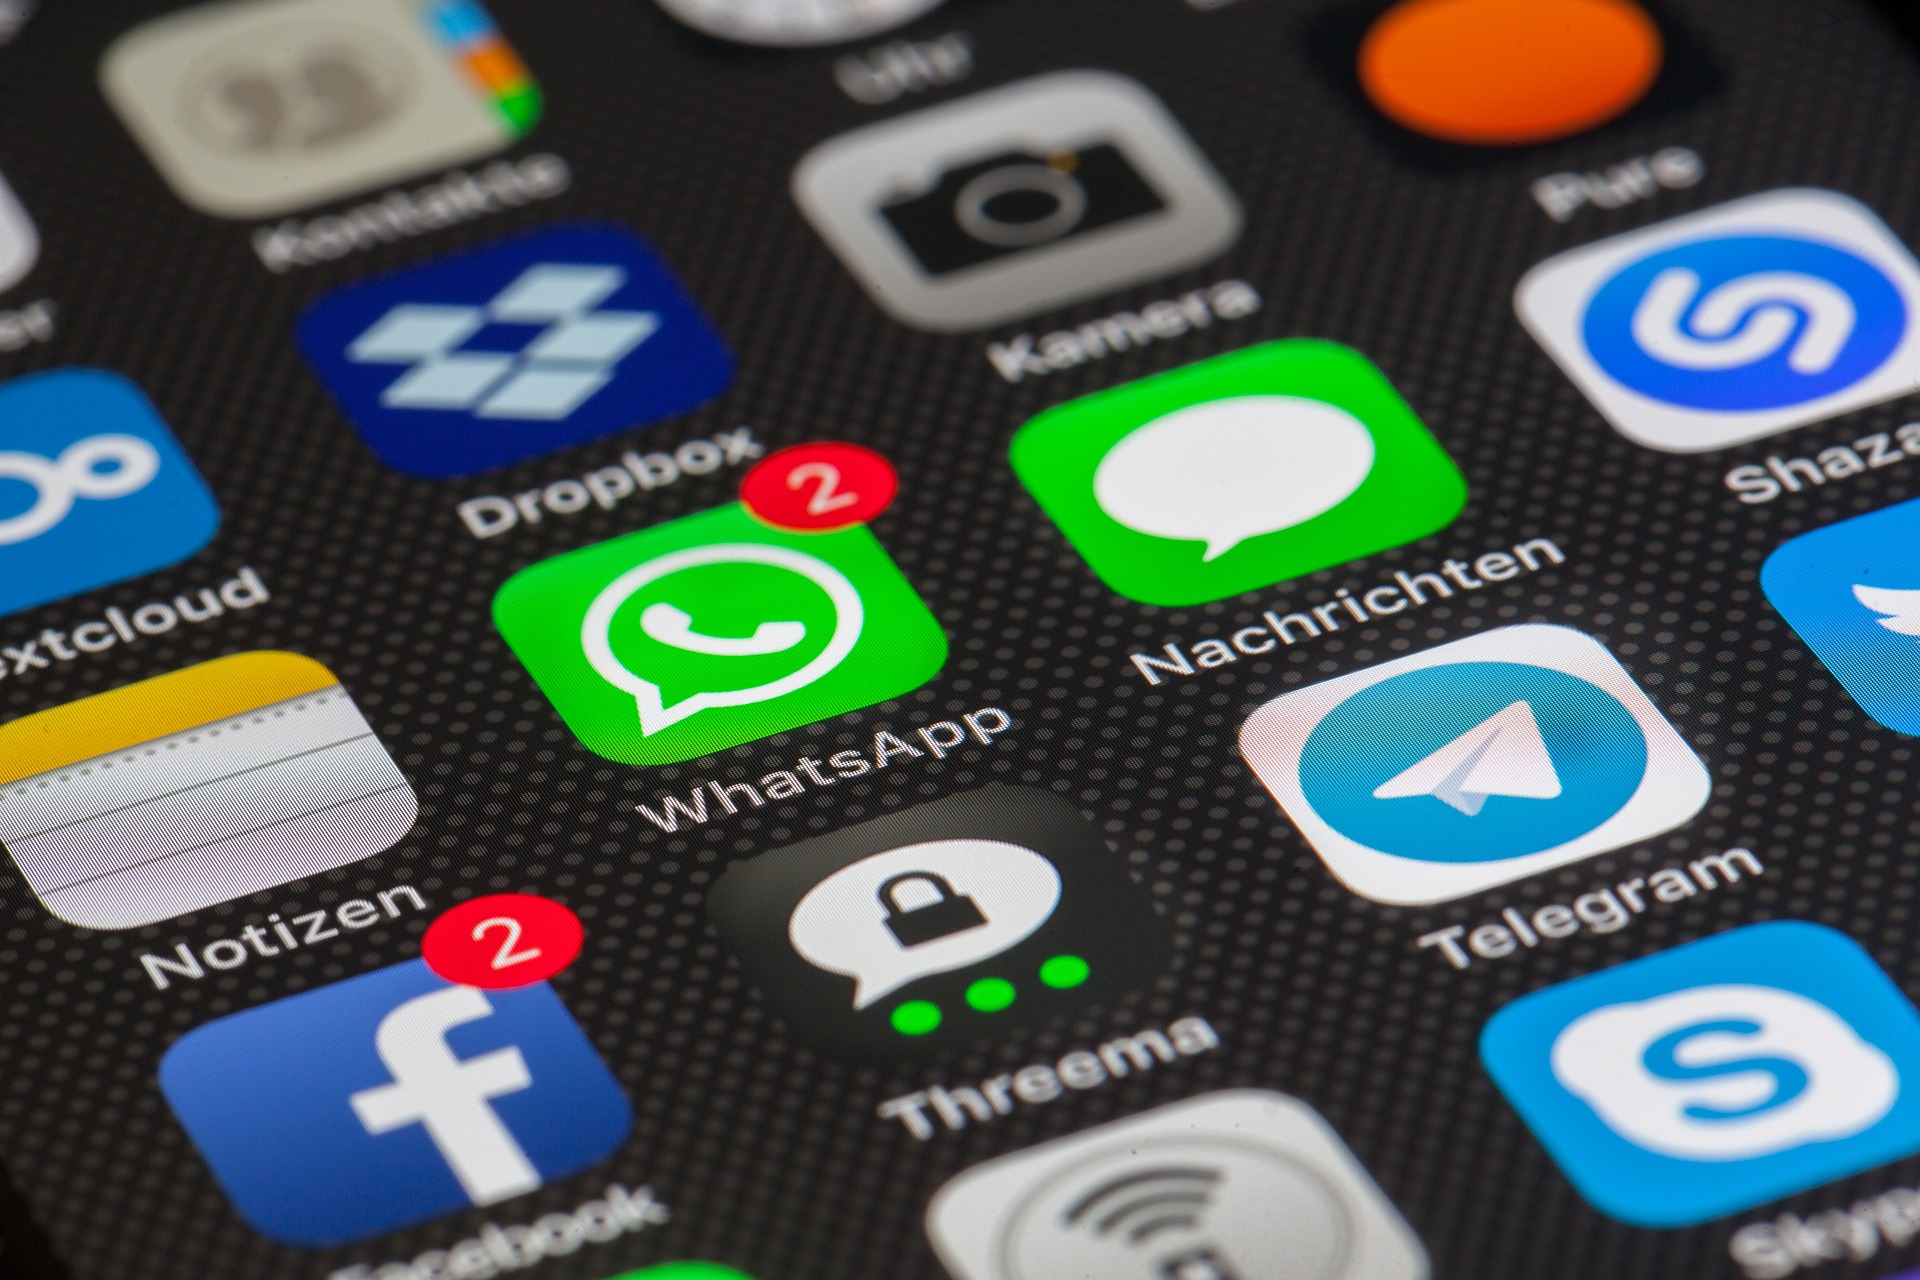 How to Use WhatsApp Without a Phone Number